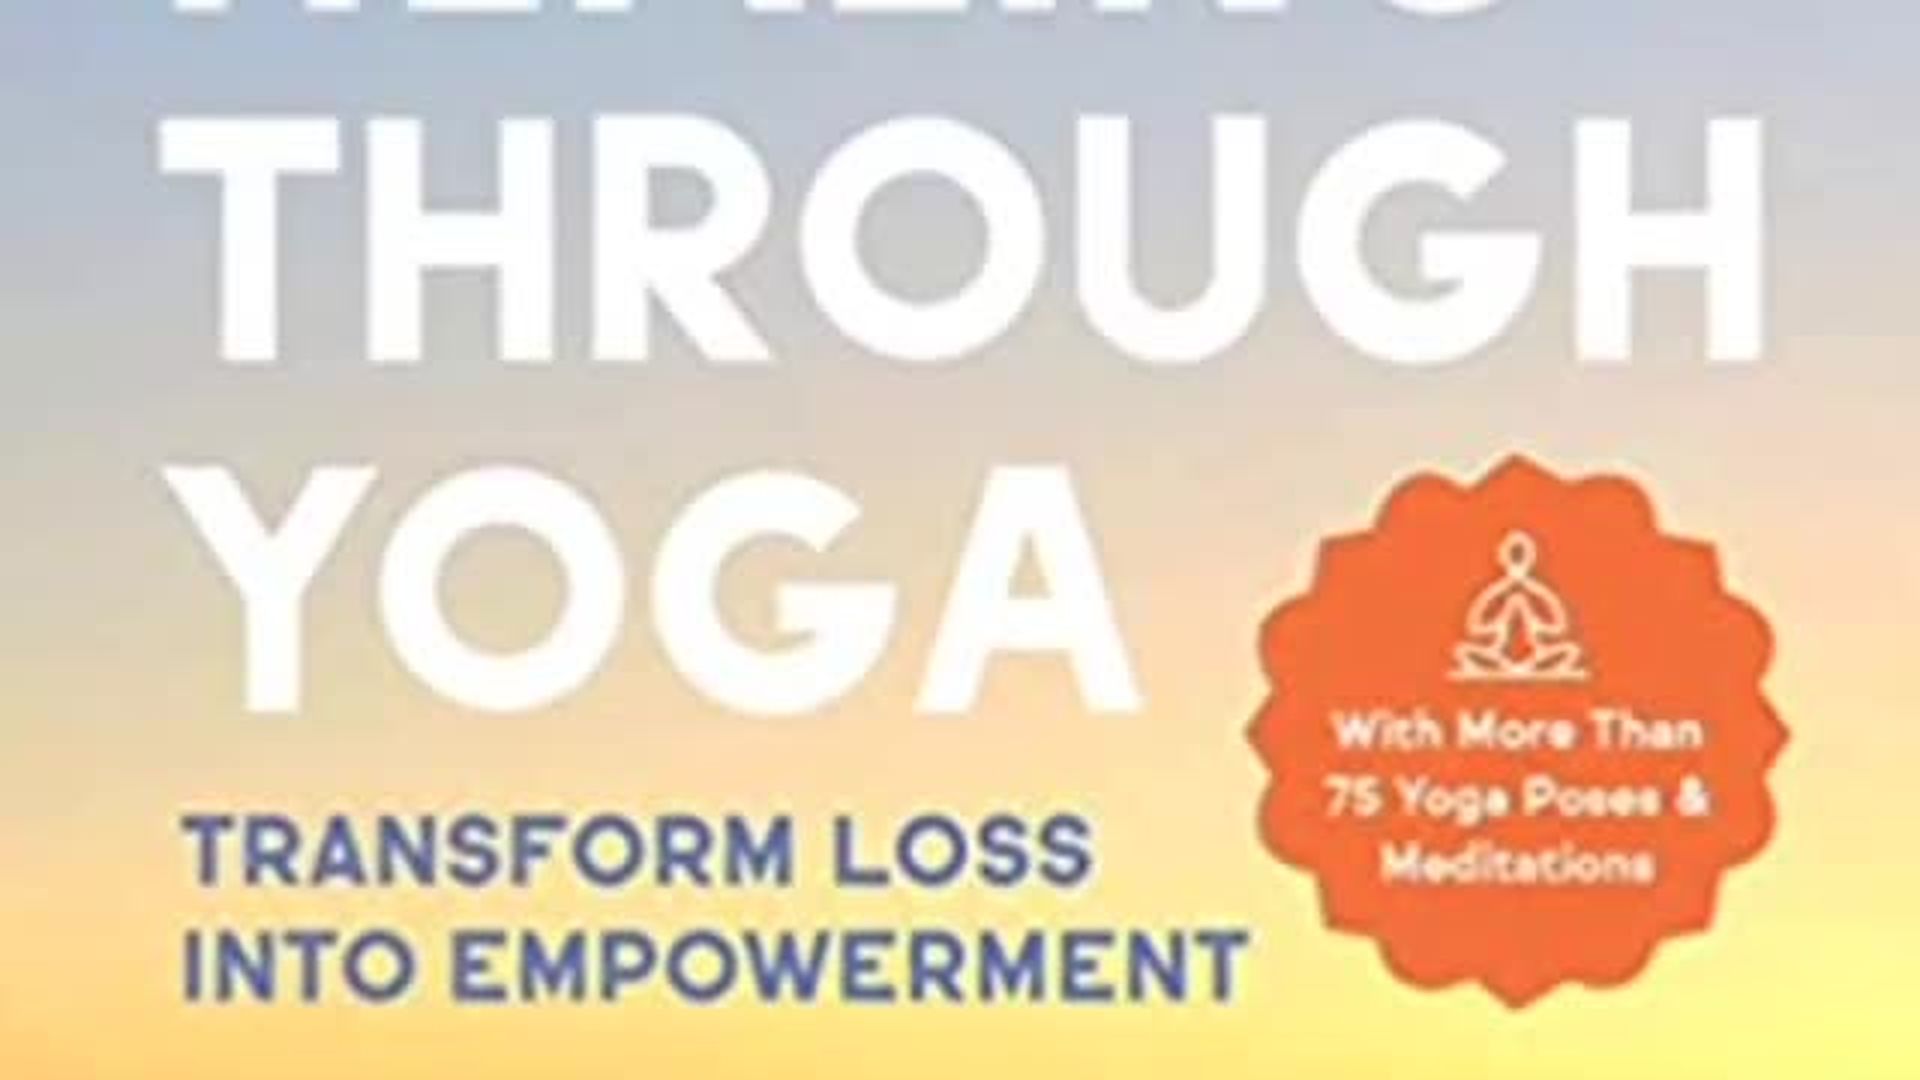 Healing through Yoga Transform Loss Into Empowerment with Paul Denniston on High Road to Humanity